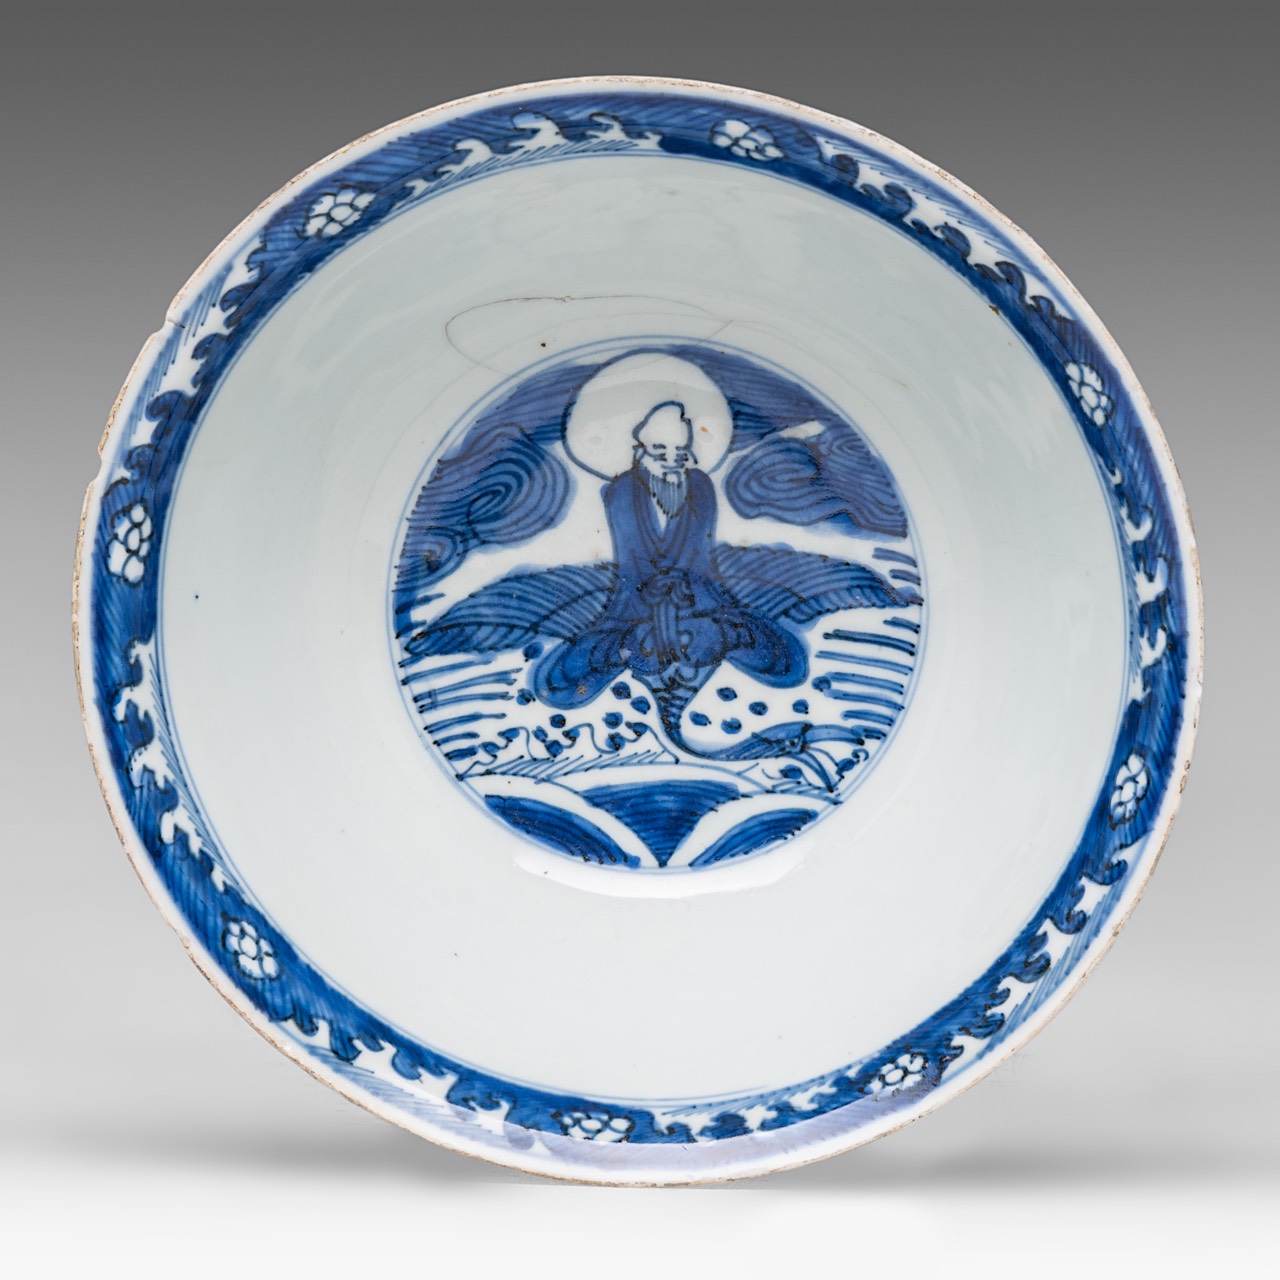 A Chinese blue and white 'Luohan' bowl, Wanli period, Ming dynasty, H 9 - dia 22,5 cm - Image 3 of 8